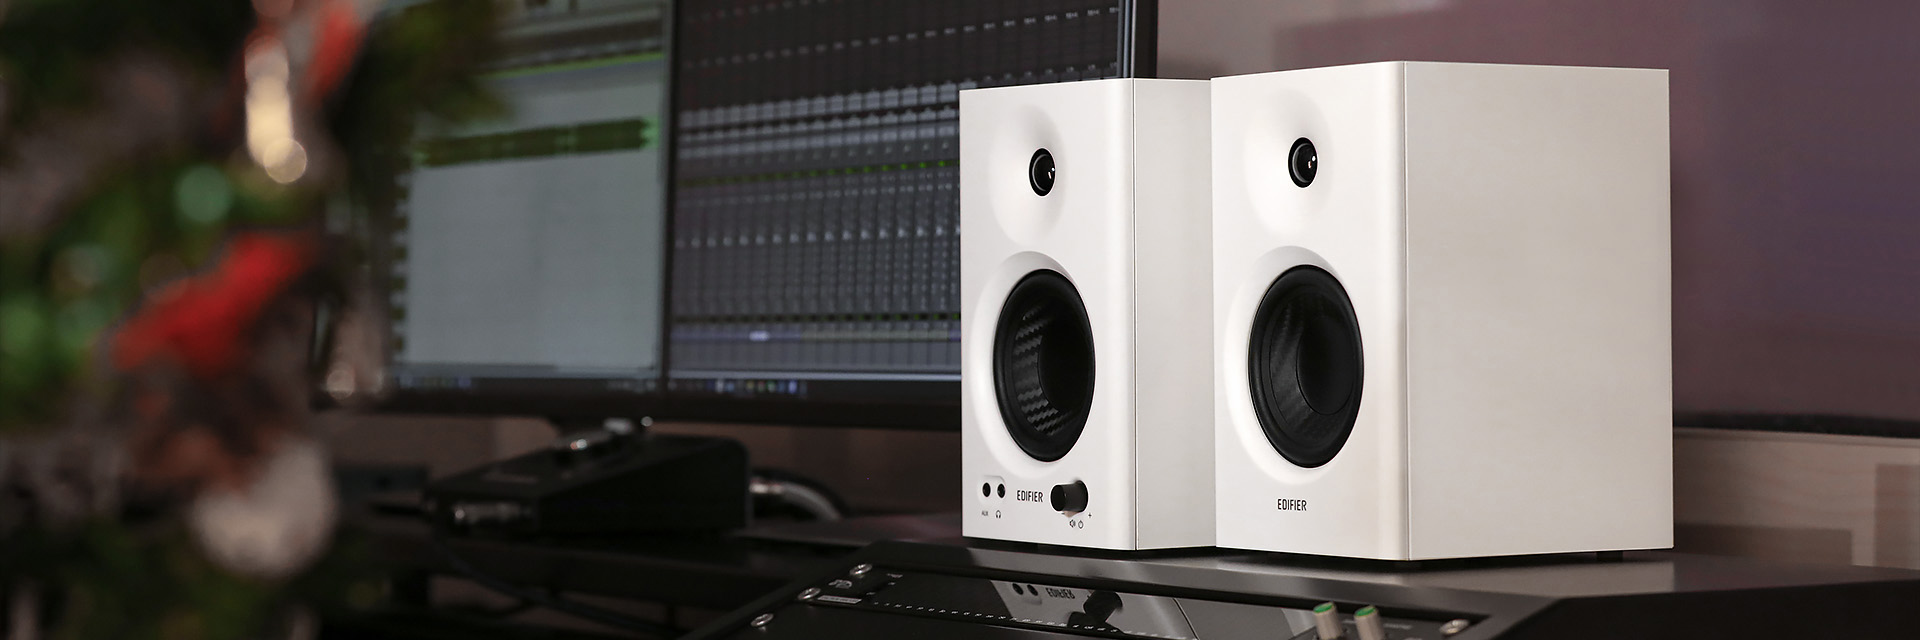 Edifier MR4 Powered Monitor Speakers are on a table with professional music mixing equipment